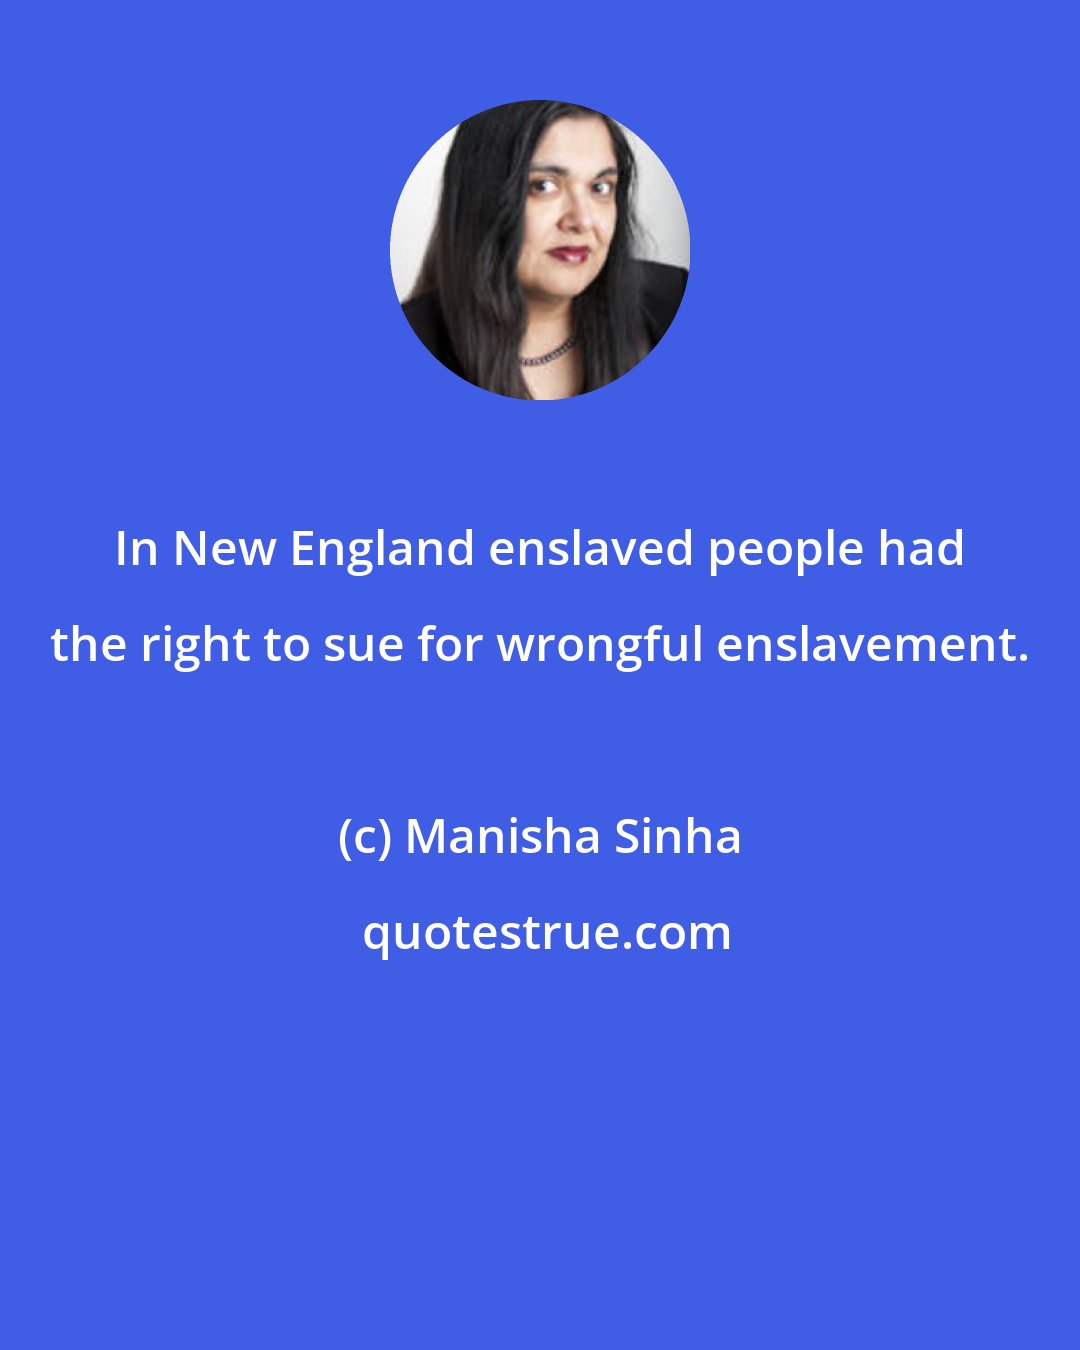 Manisha Sinha: In New England enslaved people had the right to sue for wrongful enslavement.